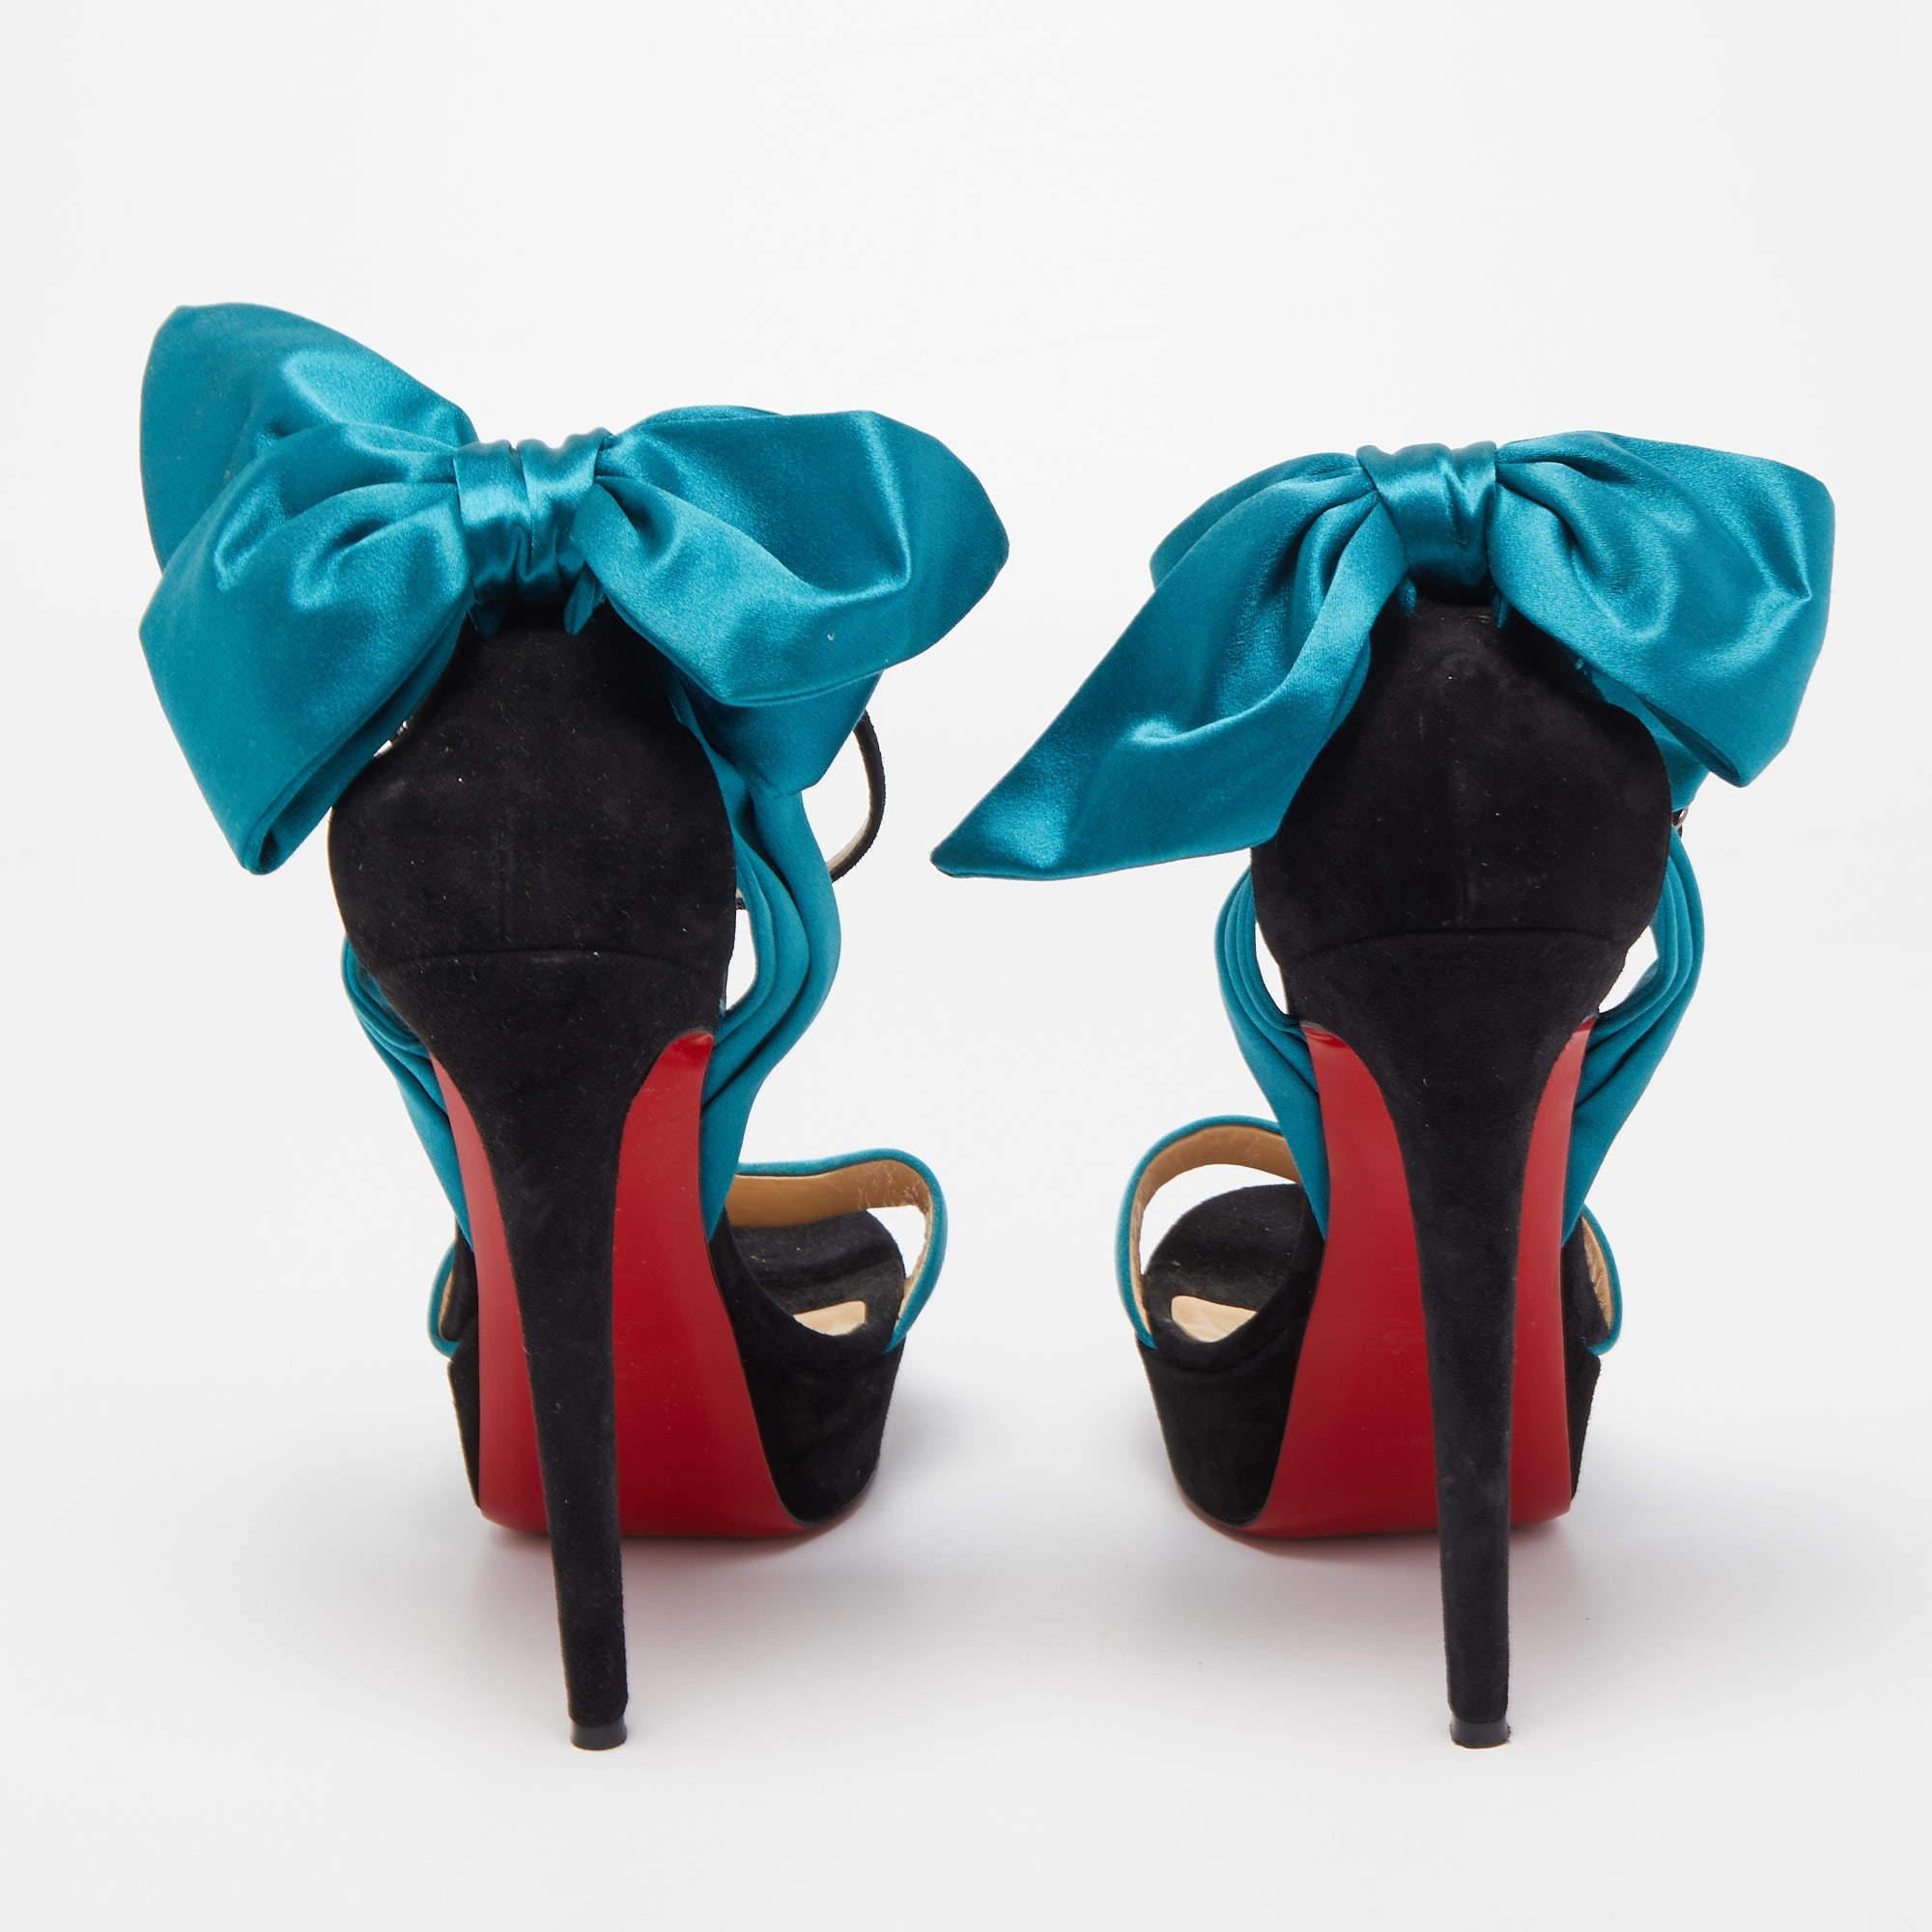 Christian Louboutin Teal/Black Satin and Suede Vampanodo Sandals Size 40.5 2